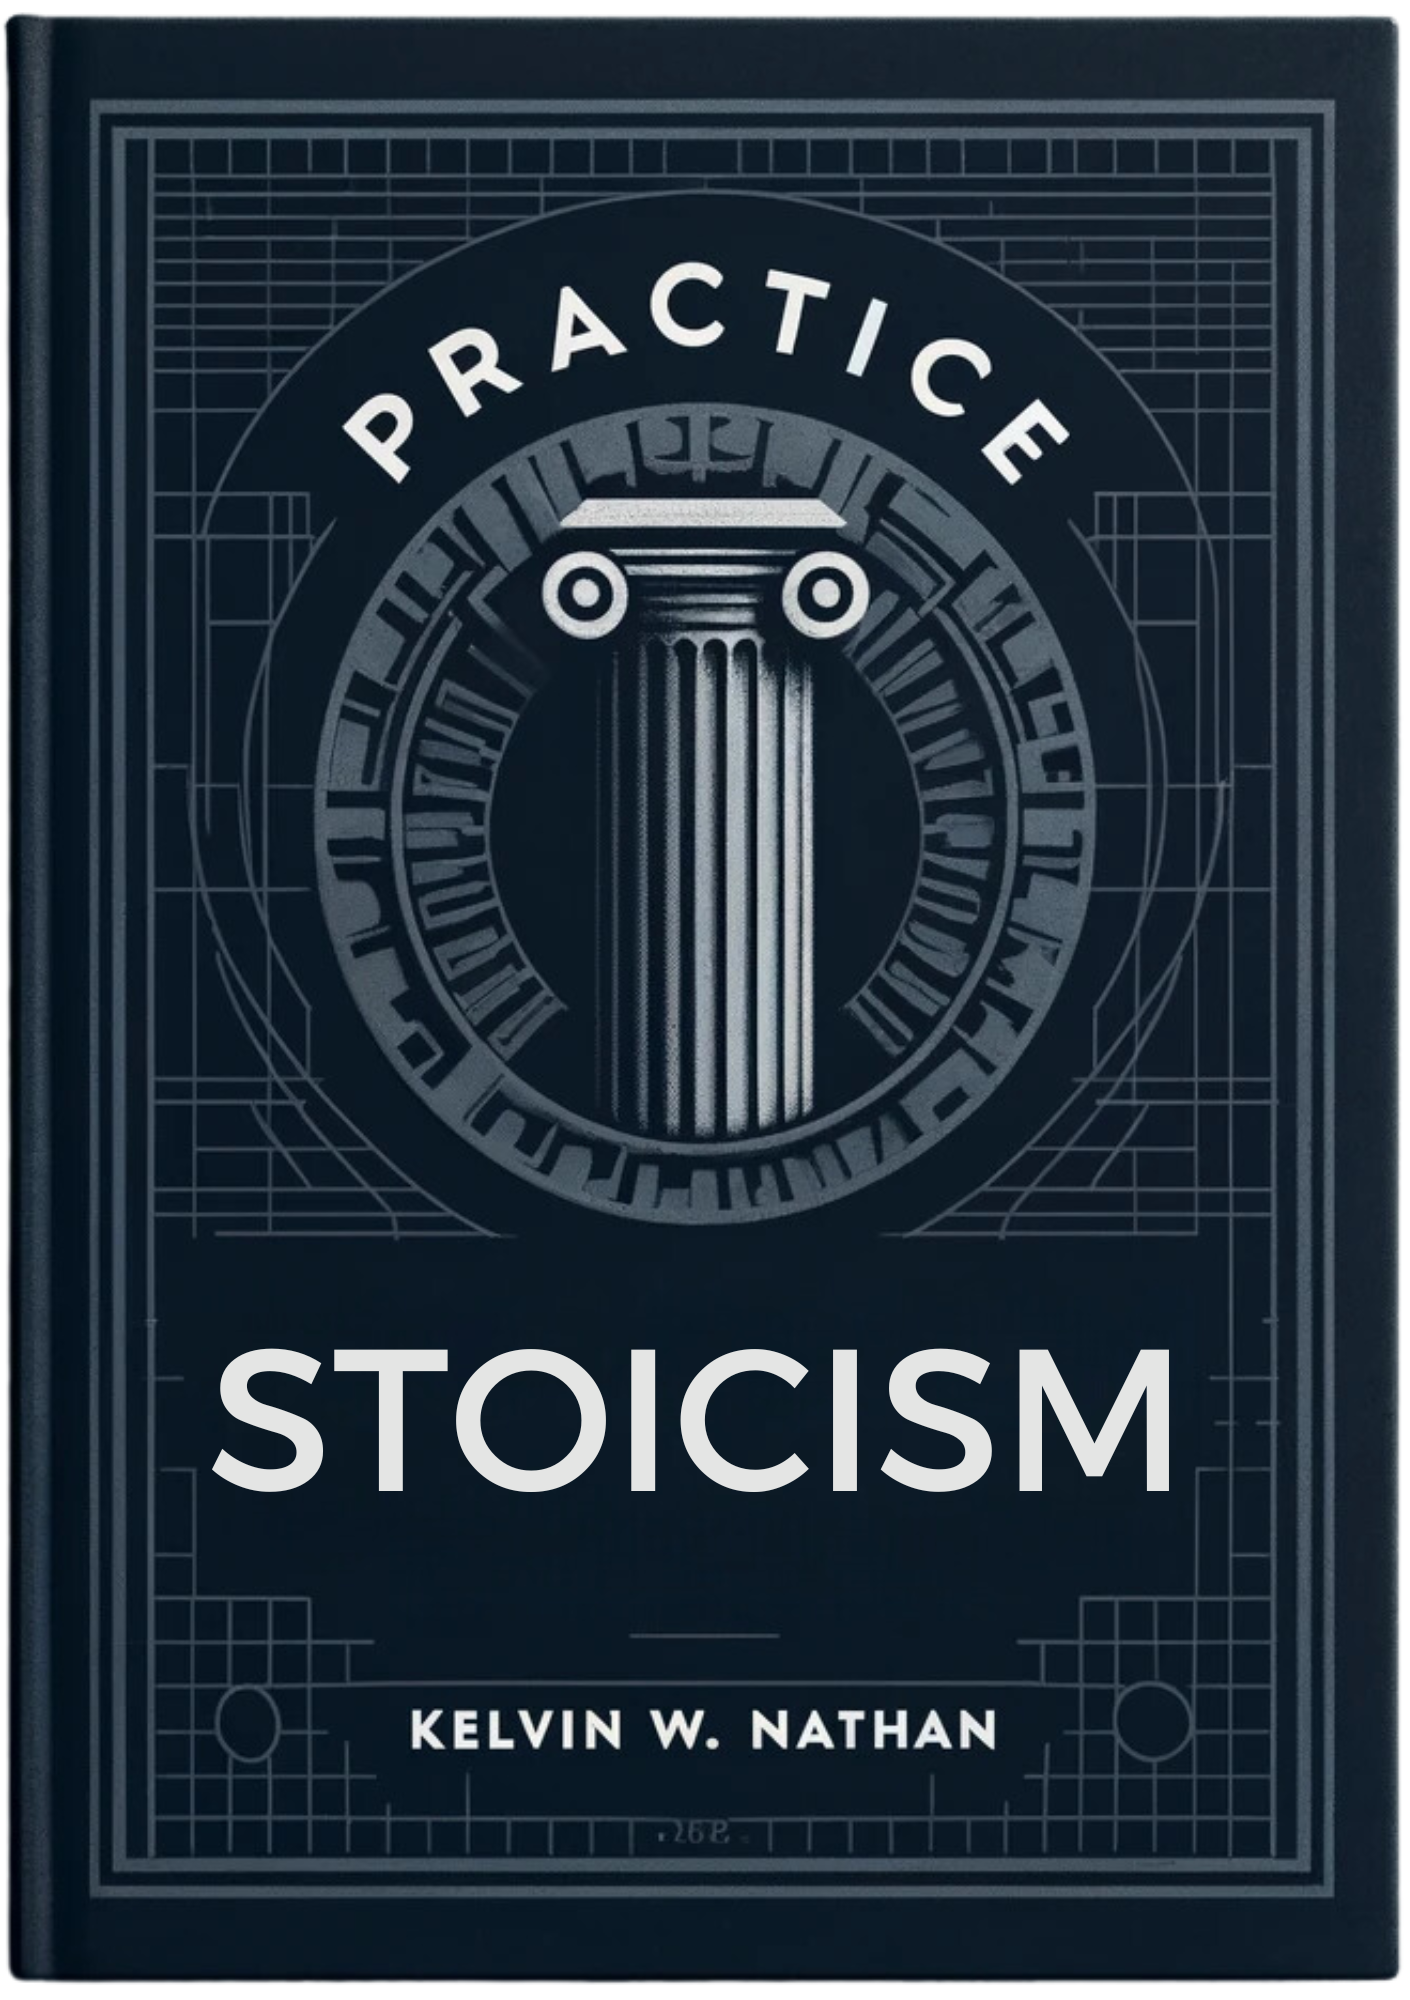 Practice Stoicism: How To Stop Overcomplicating Life 101